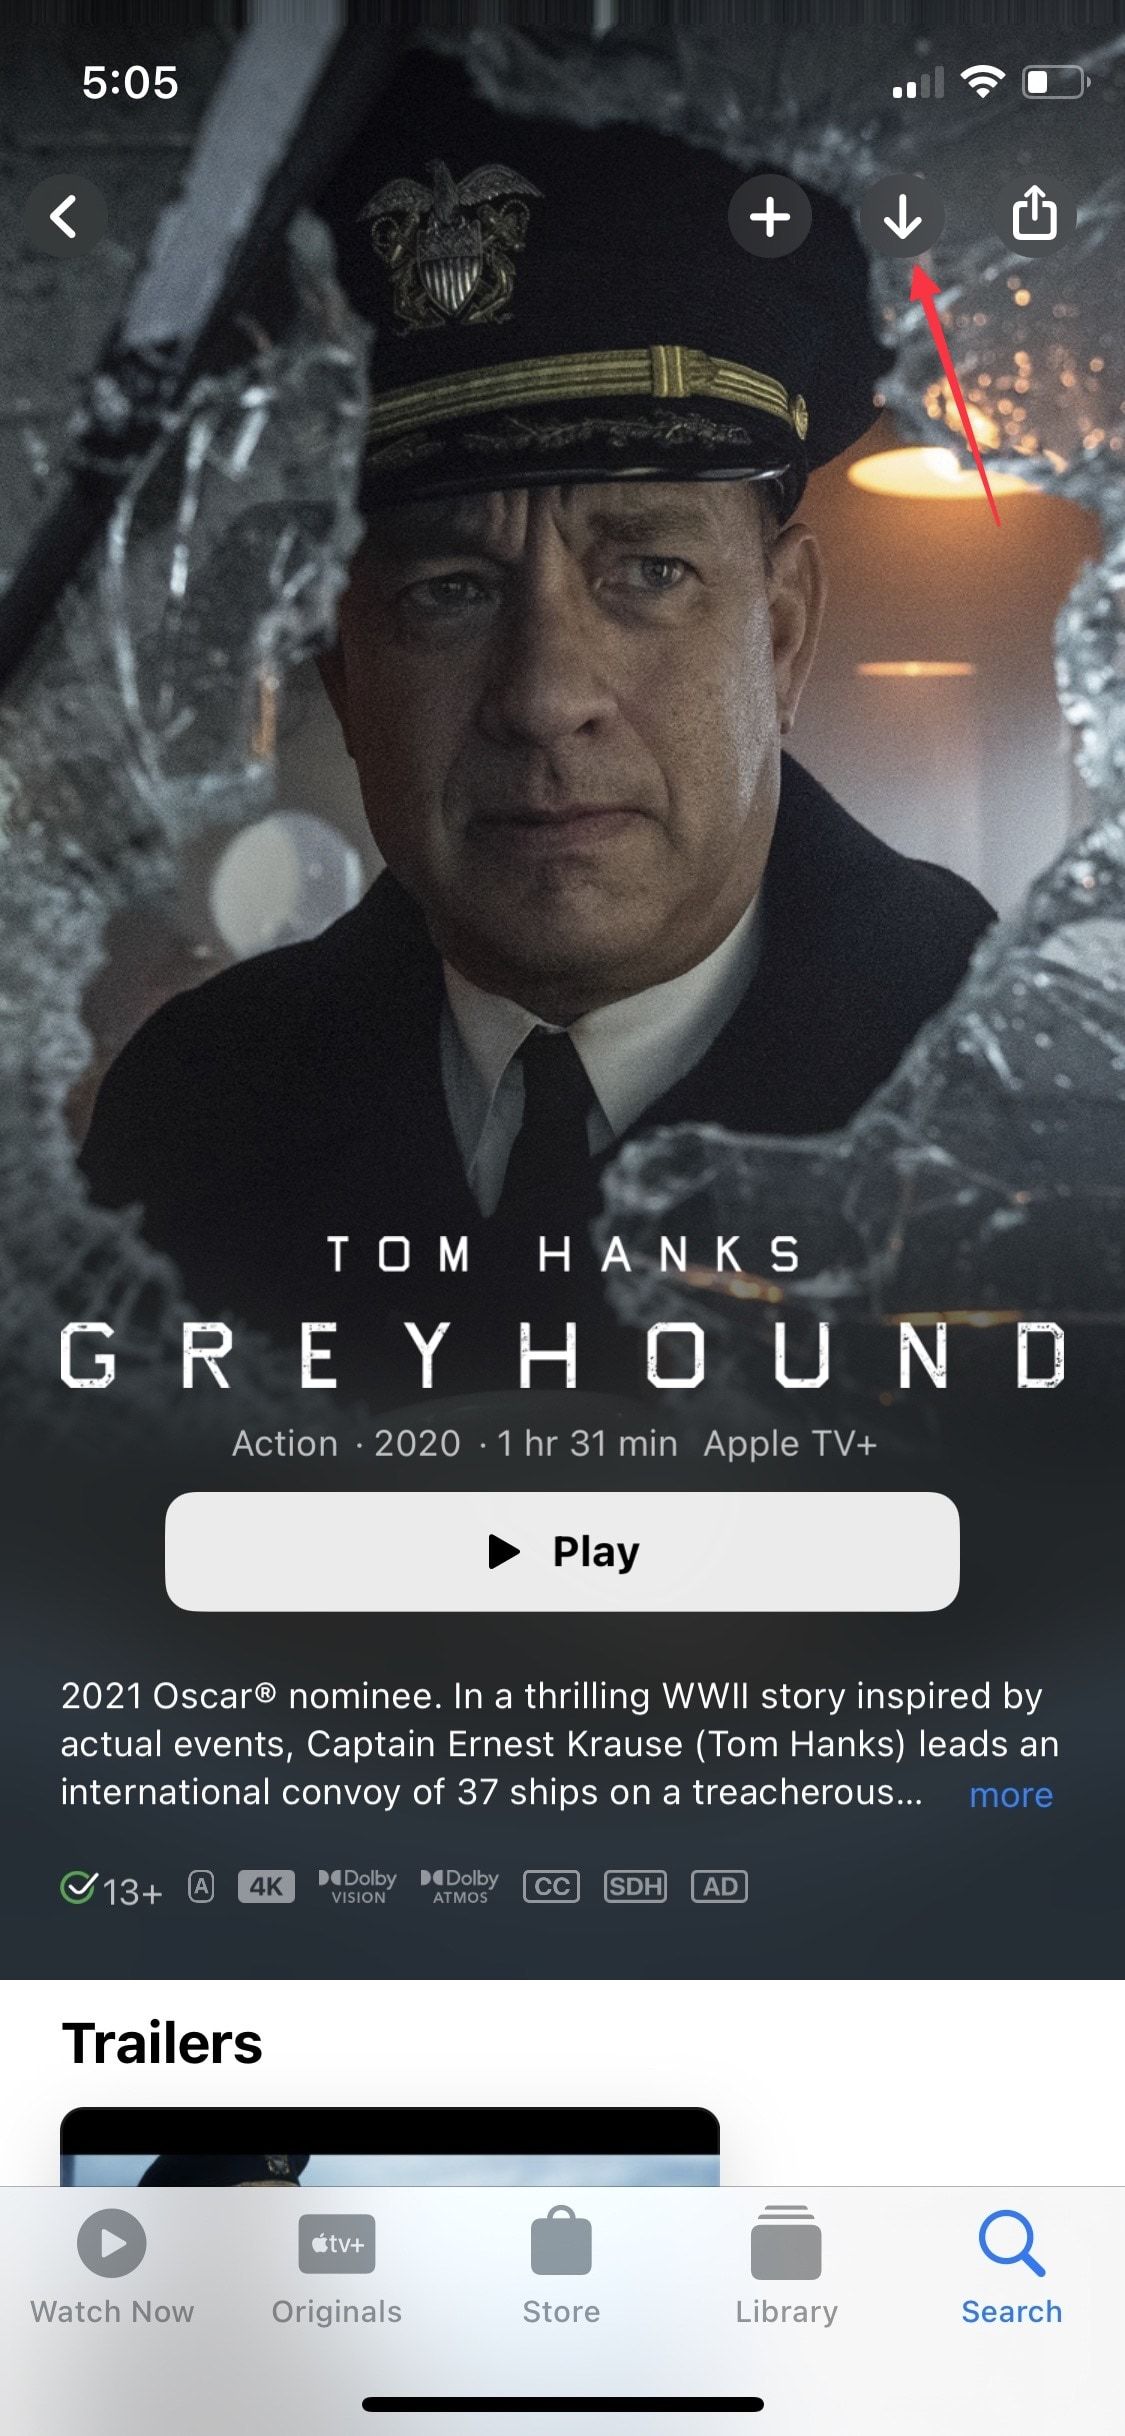 download button for movie on Apple TV+